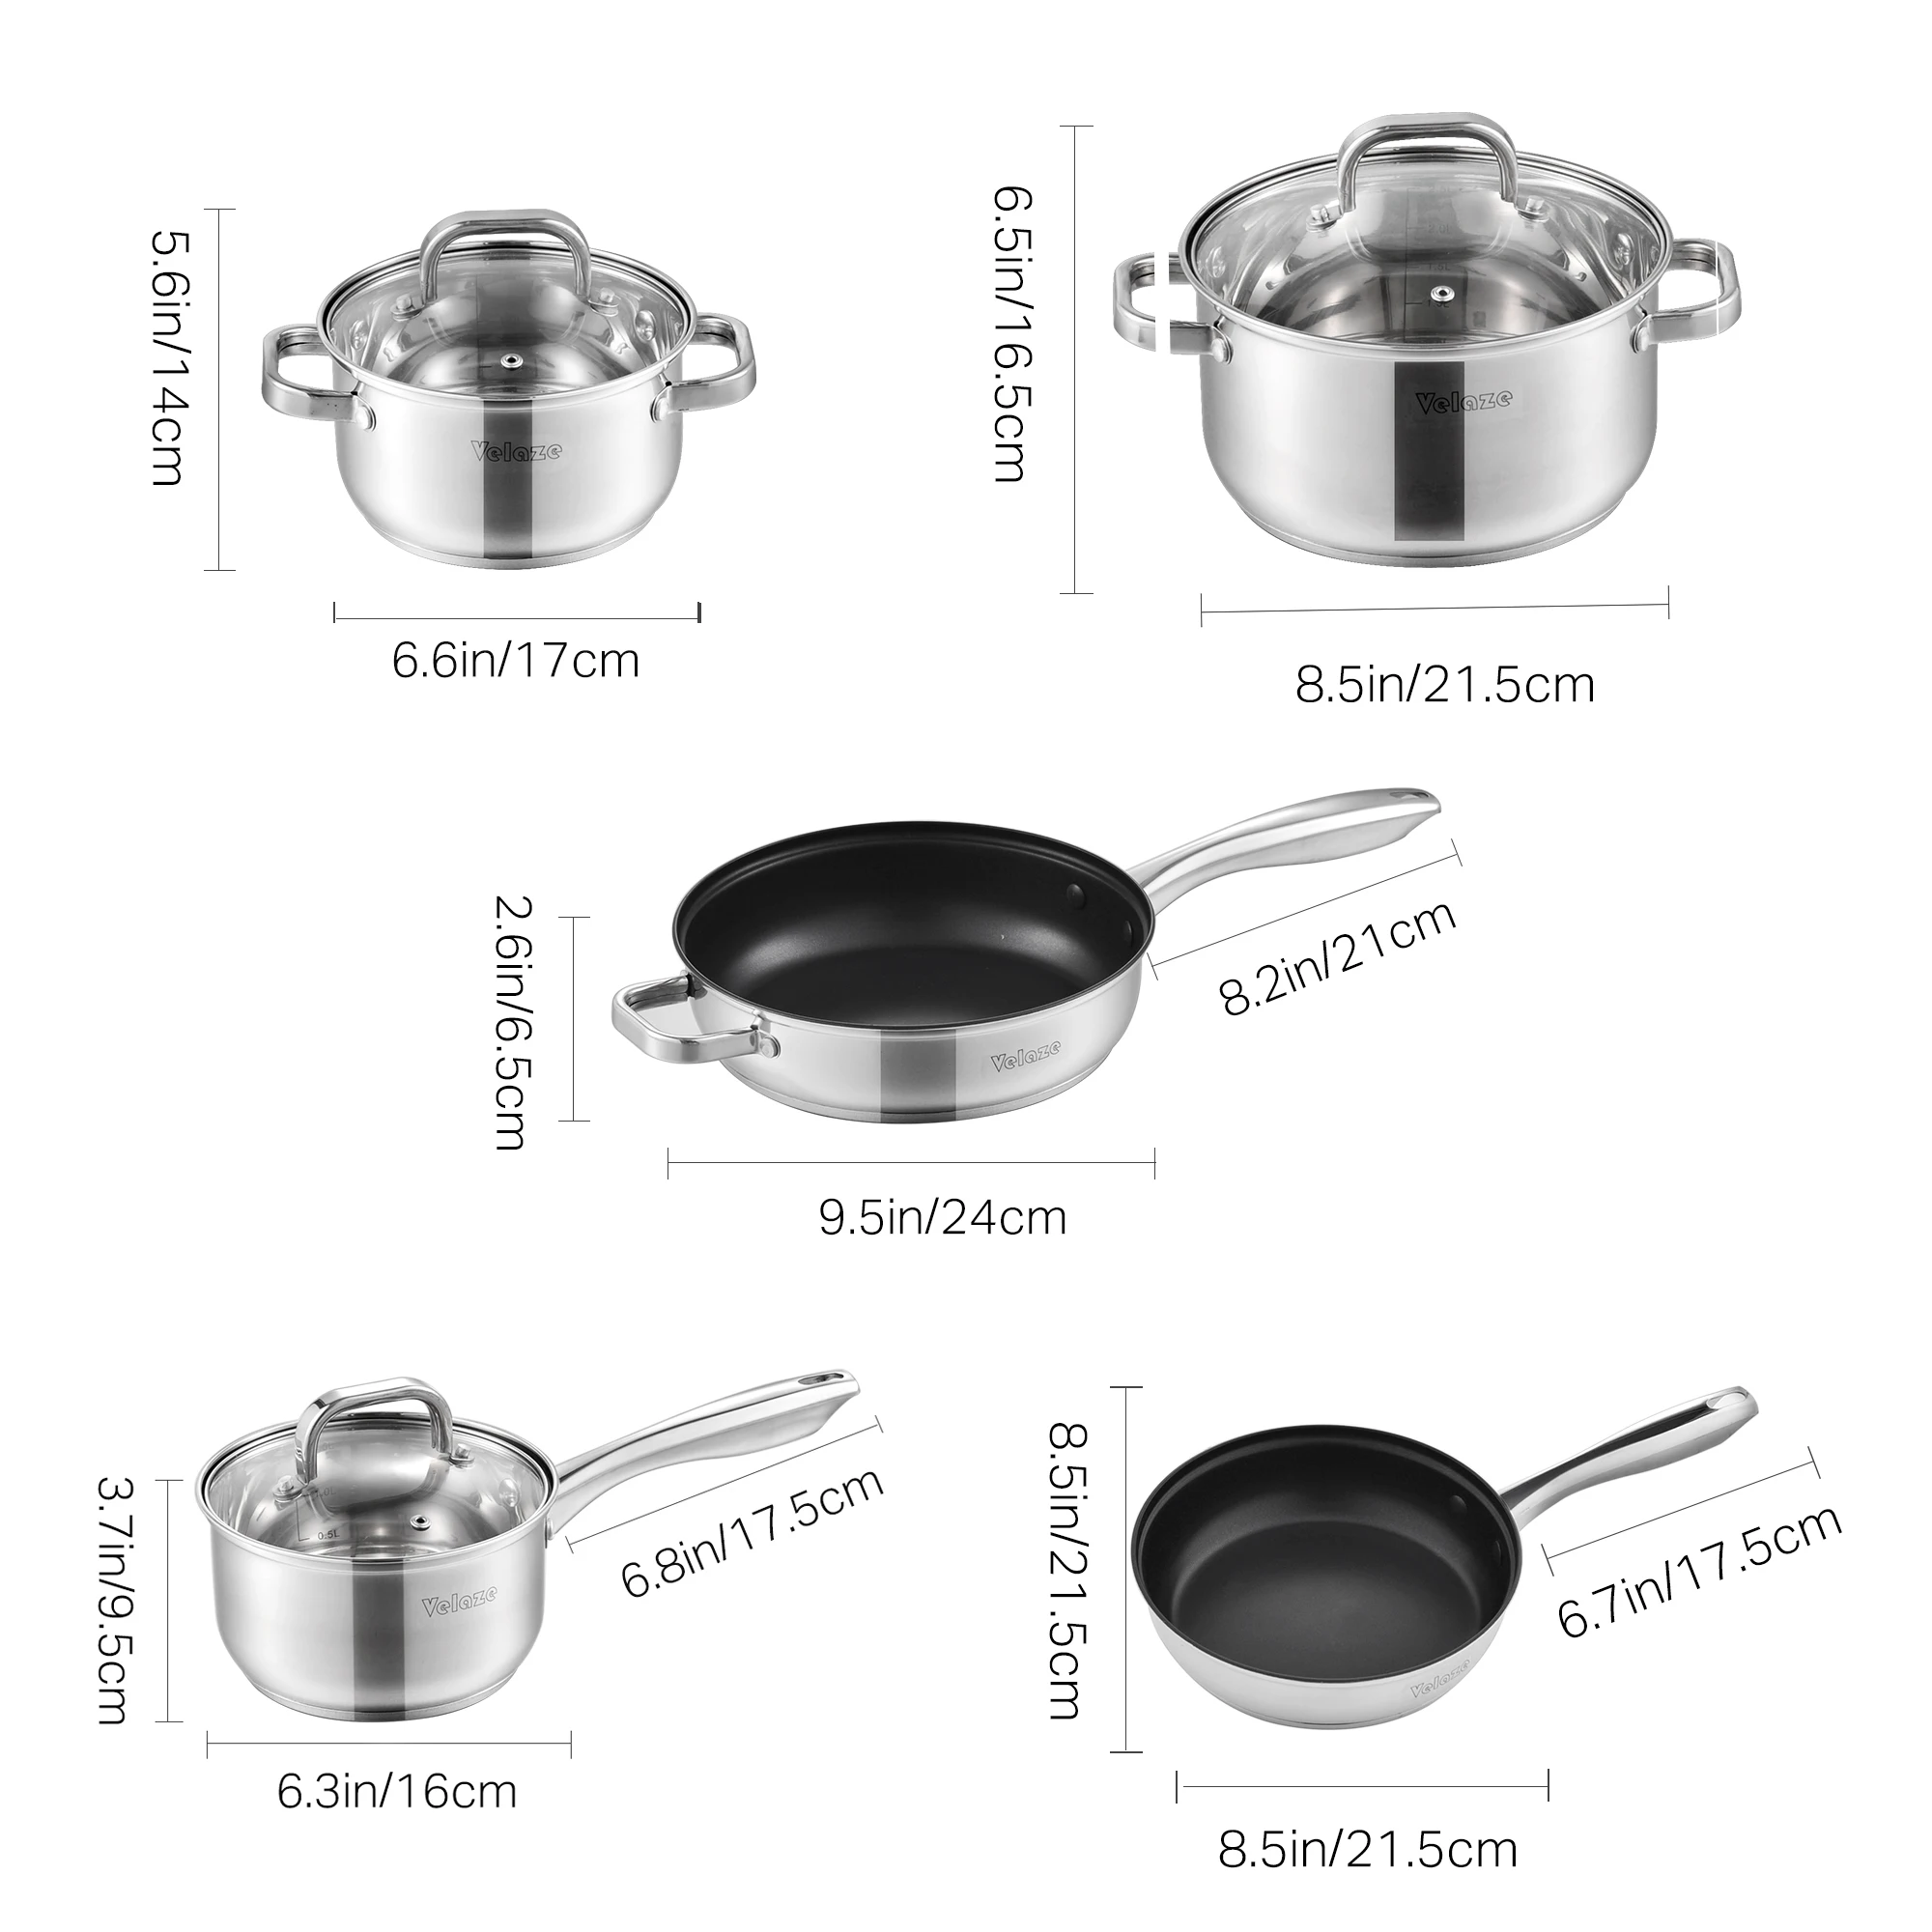 https://ae01.alicdn.com/kf/Se603f03c39bc45599413dd533f749f2bQ/Velaze-Cookware-Set-Stainless-Steel-8-9-10-Piece-Pan-Set-Induction-Safe-Non-Stick-Frying.jpg